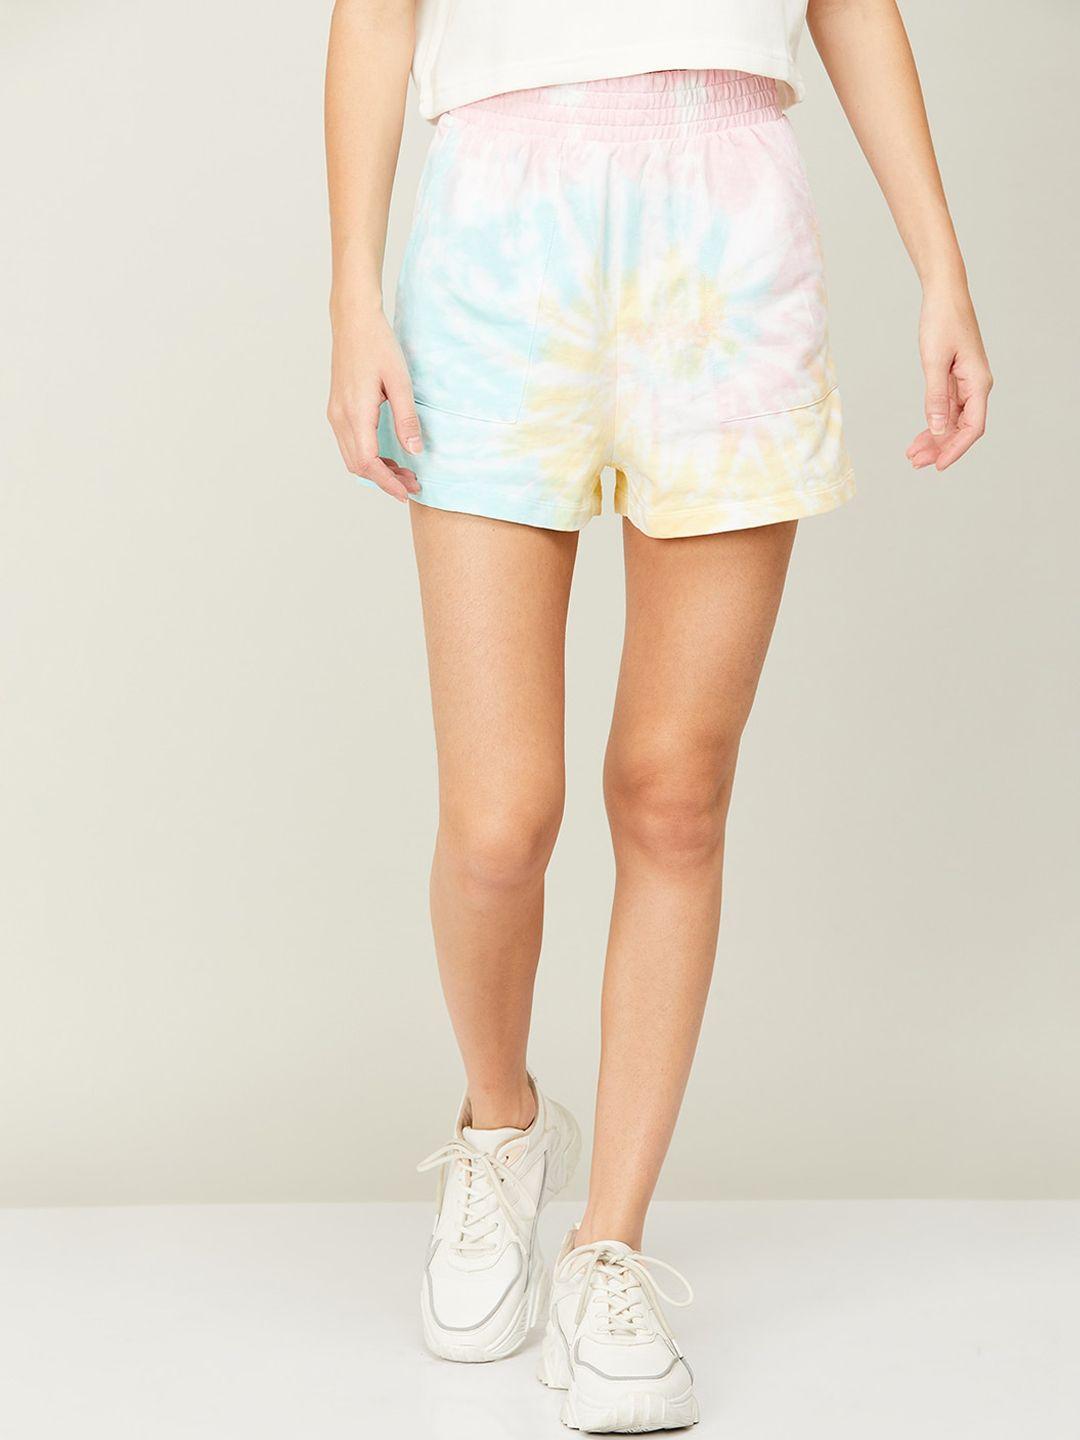 ginger-by-lifestyle-women-women-regular-fit-tie-and-dye-cotton-shorts